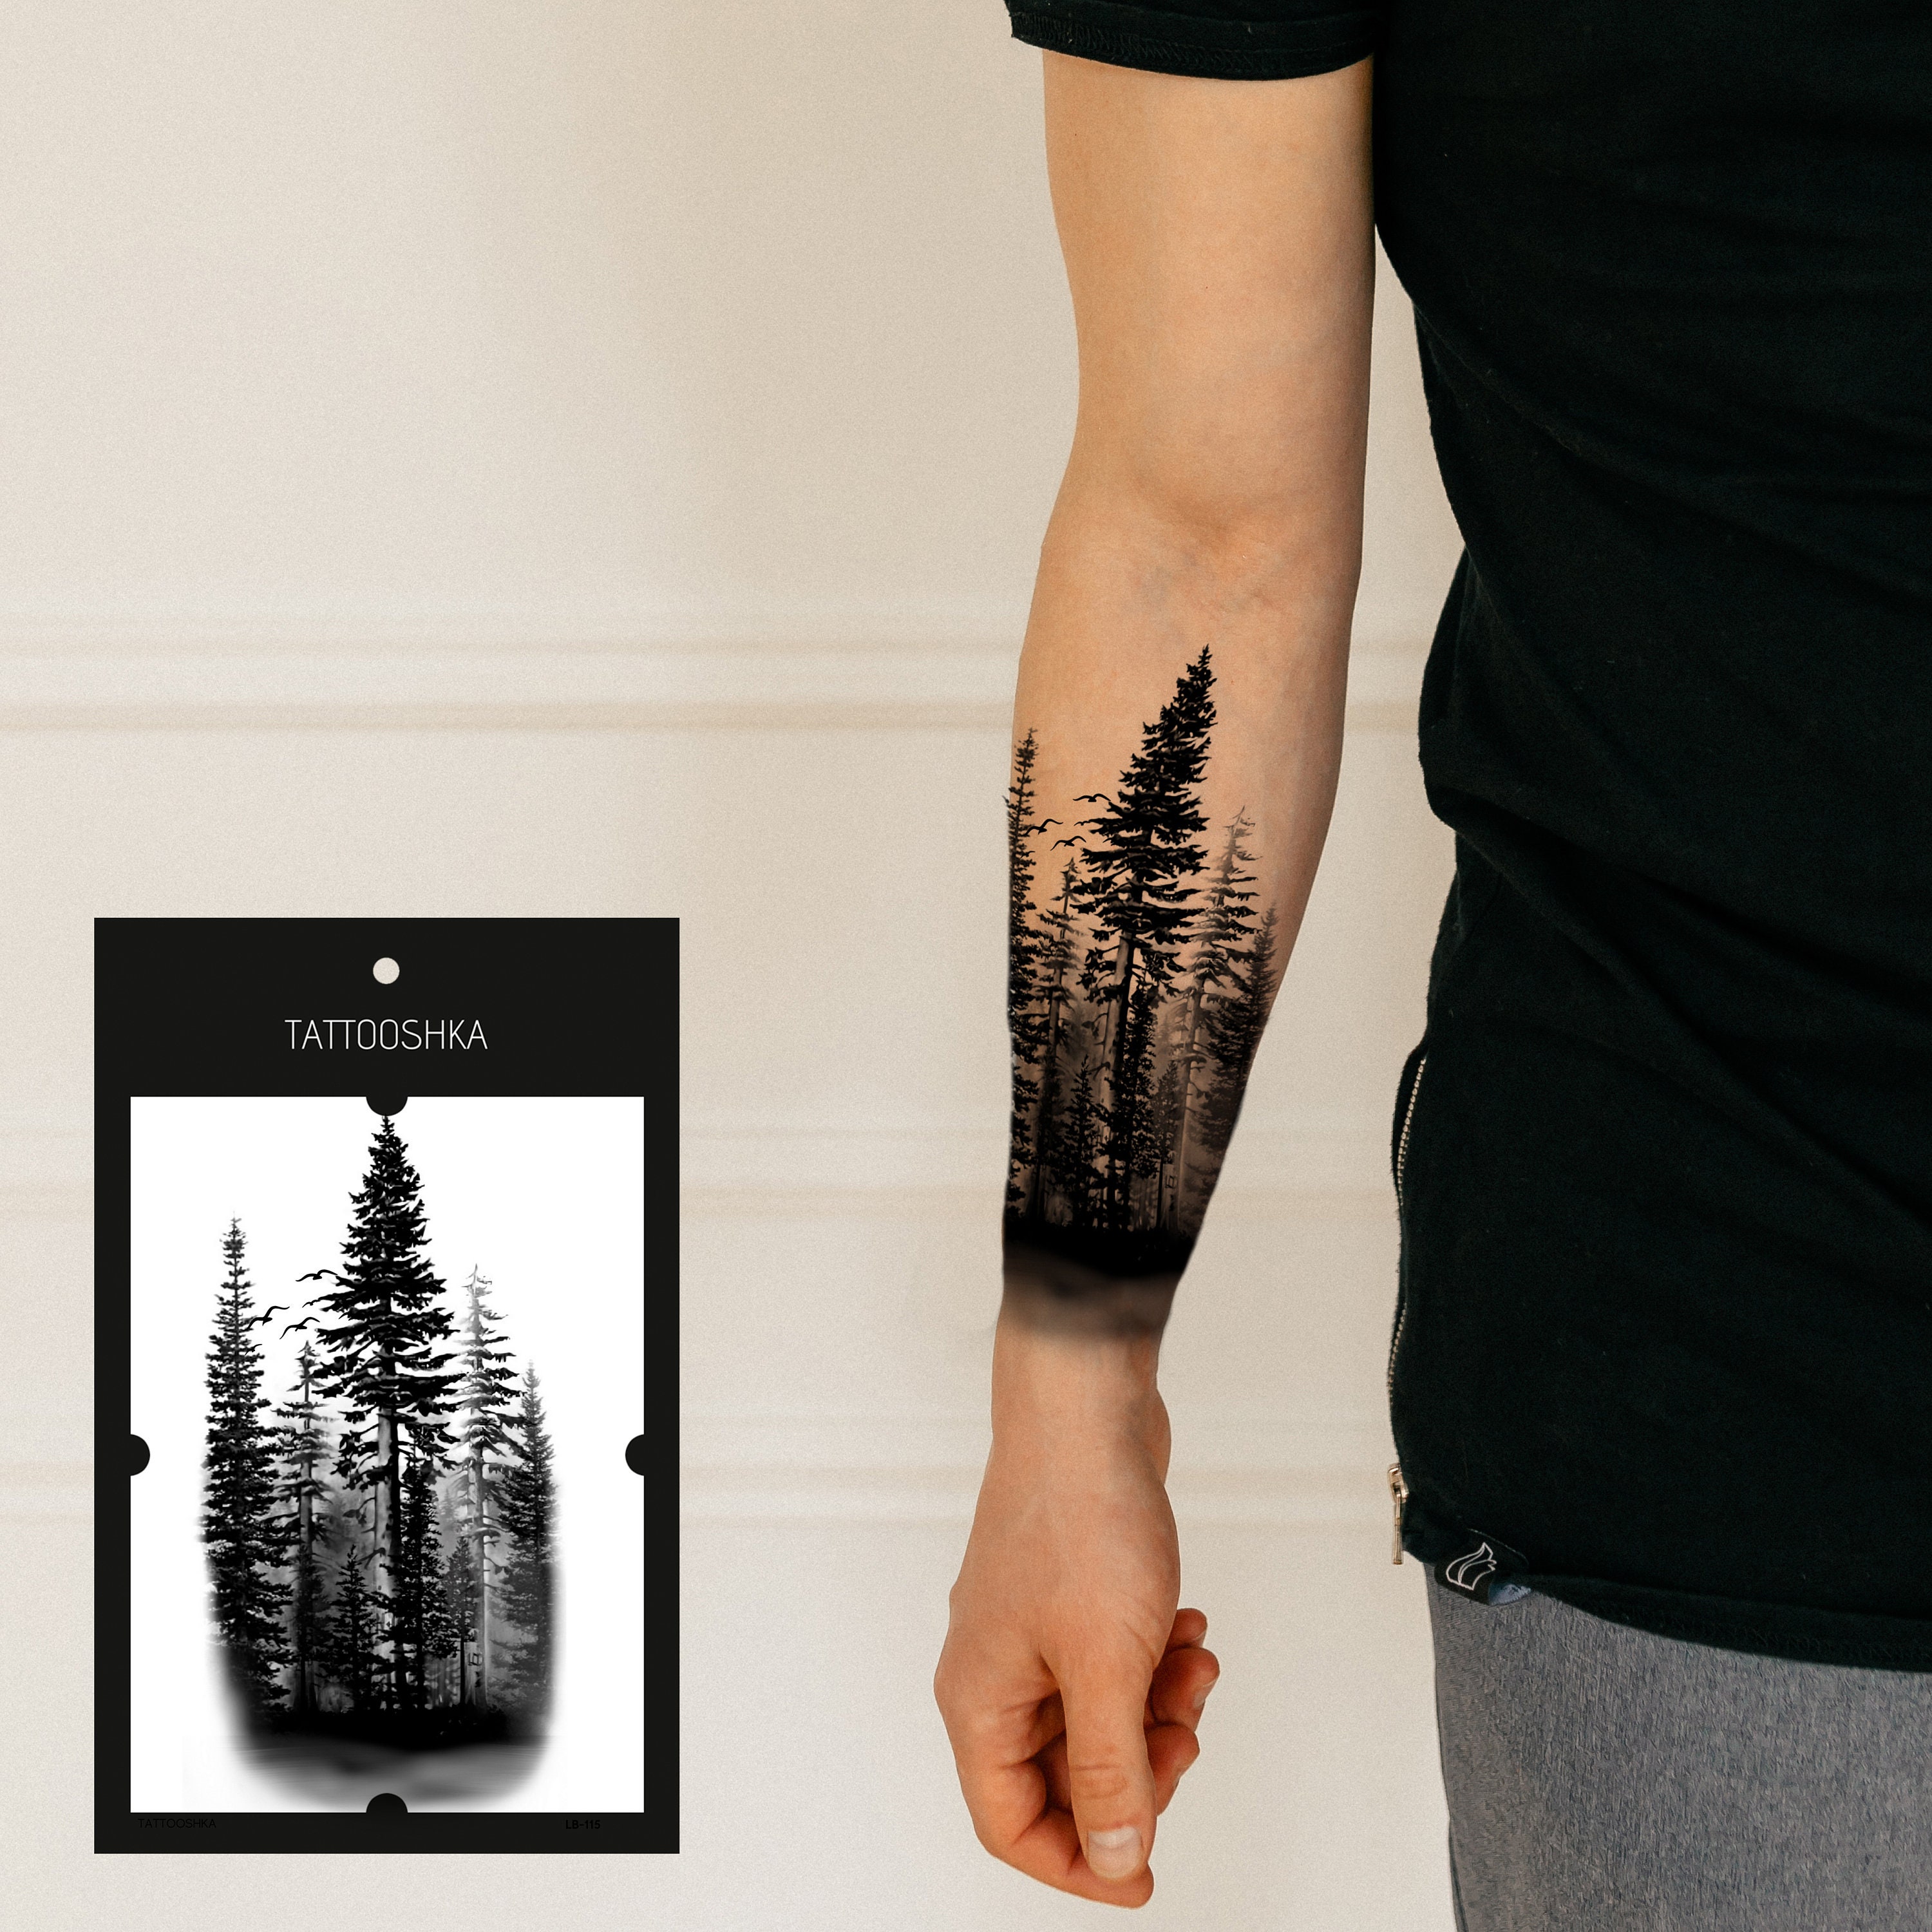 Fist of Needles Tattoo  Piercing  Mirror piece on wrist  a forest one  way Disney castle the other  Made by Susanne on herself  To book  an appointment or